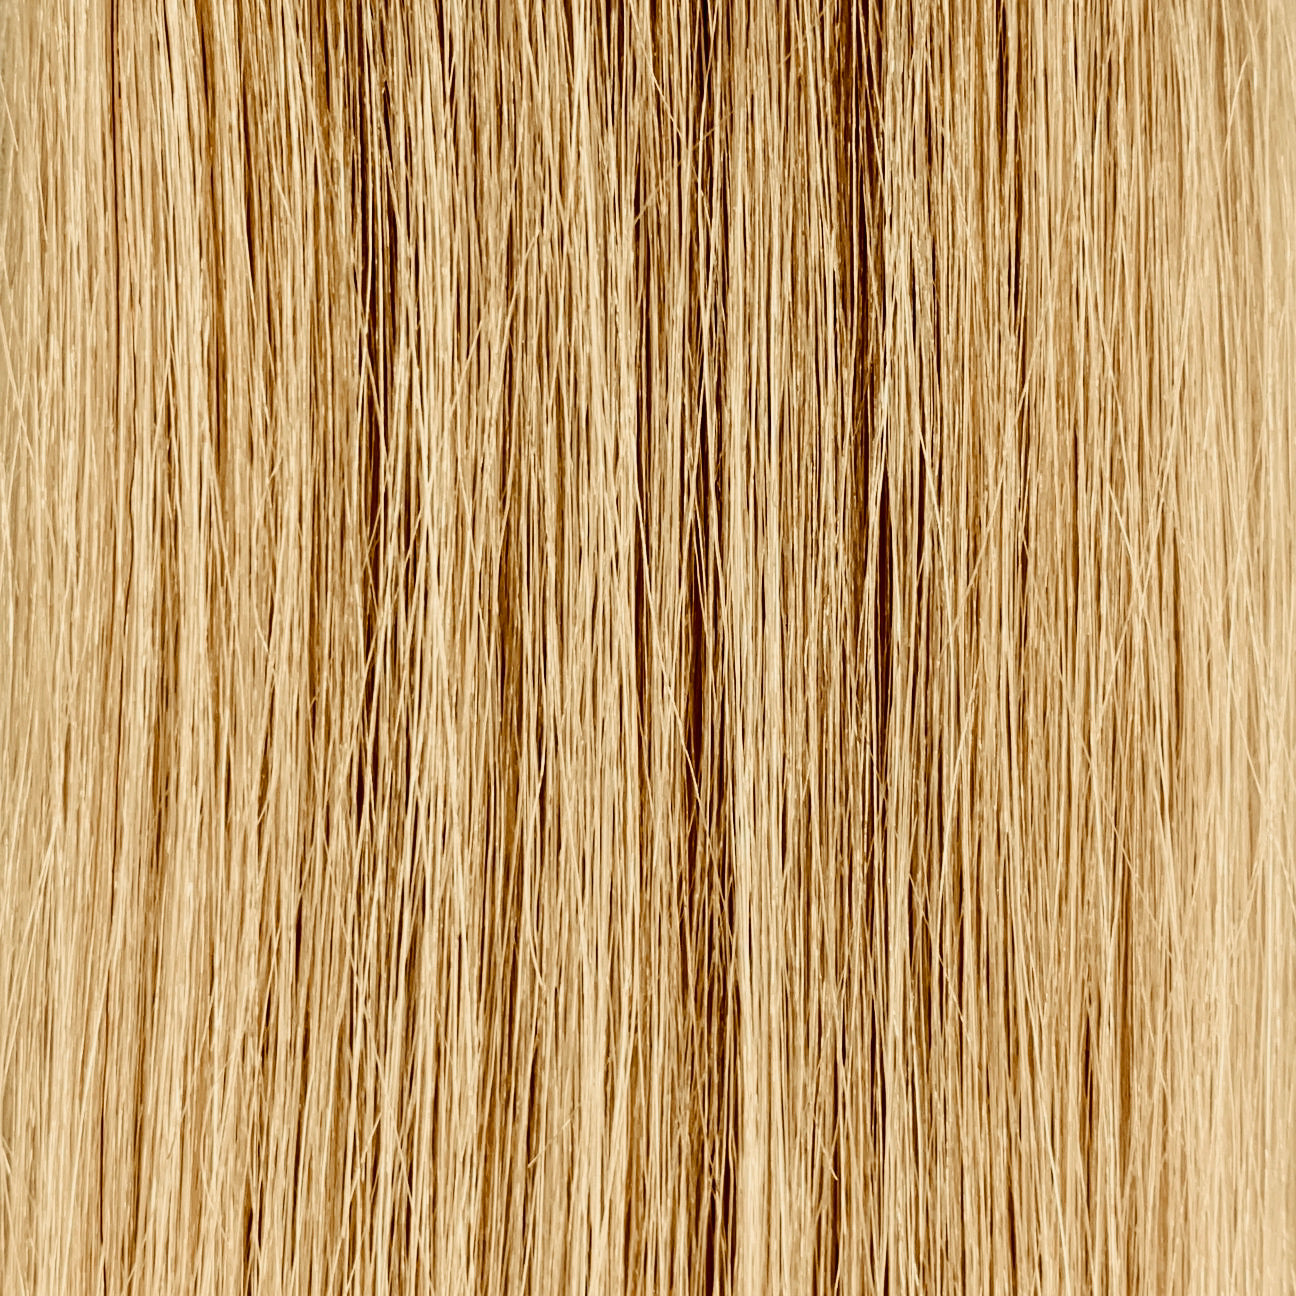 40 cm | Normal Tape Extensions | No. 14 dark blond gold